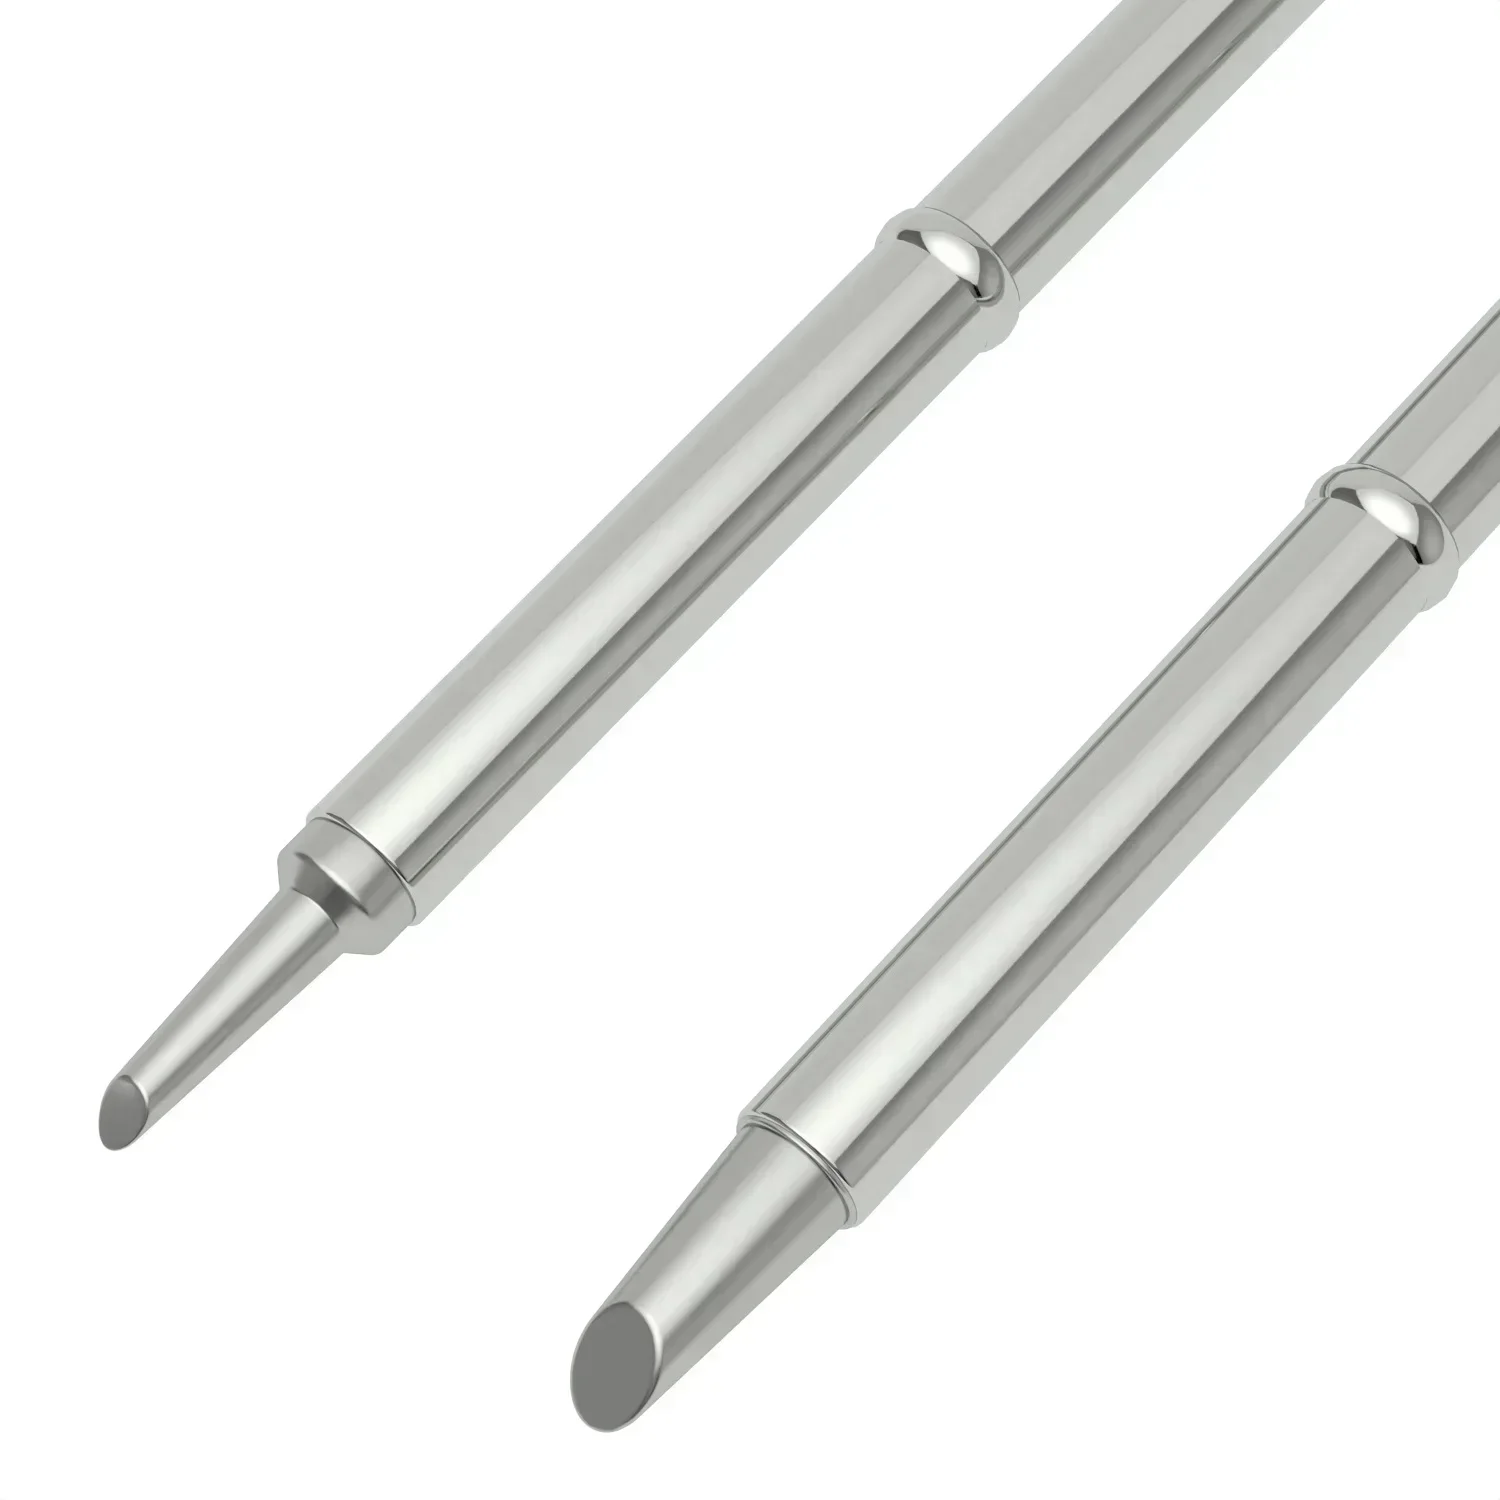 T12-BCM2 T12-BCM3 High Quality Soldering Iron Tip Bevel with Indent / Horseshoe-shaped Tip with Groove /shape BCM2/3 Tips